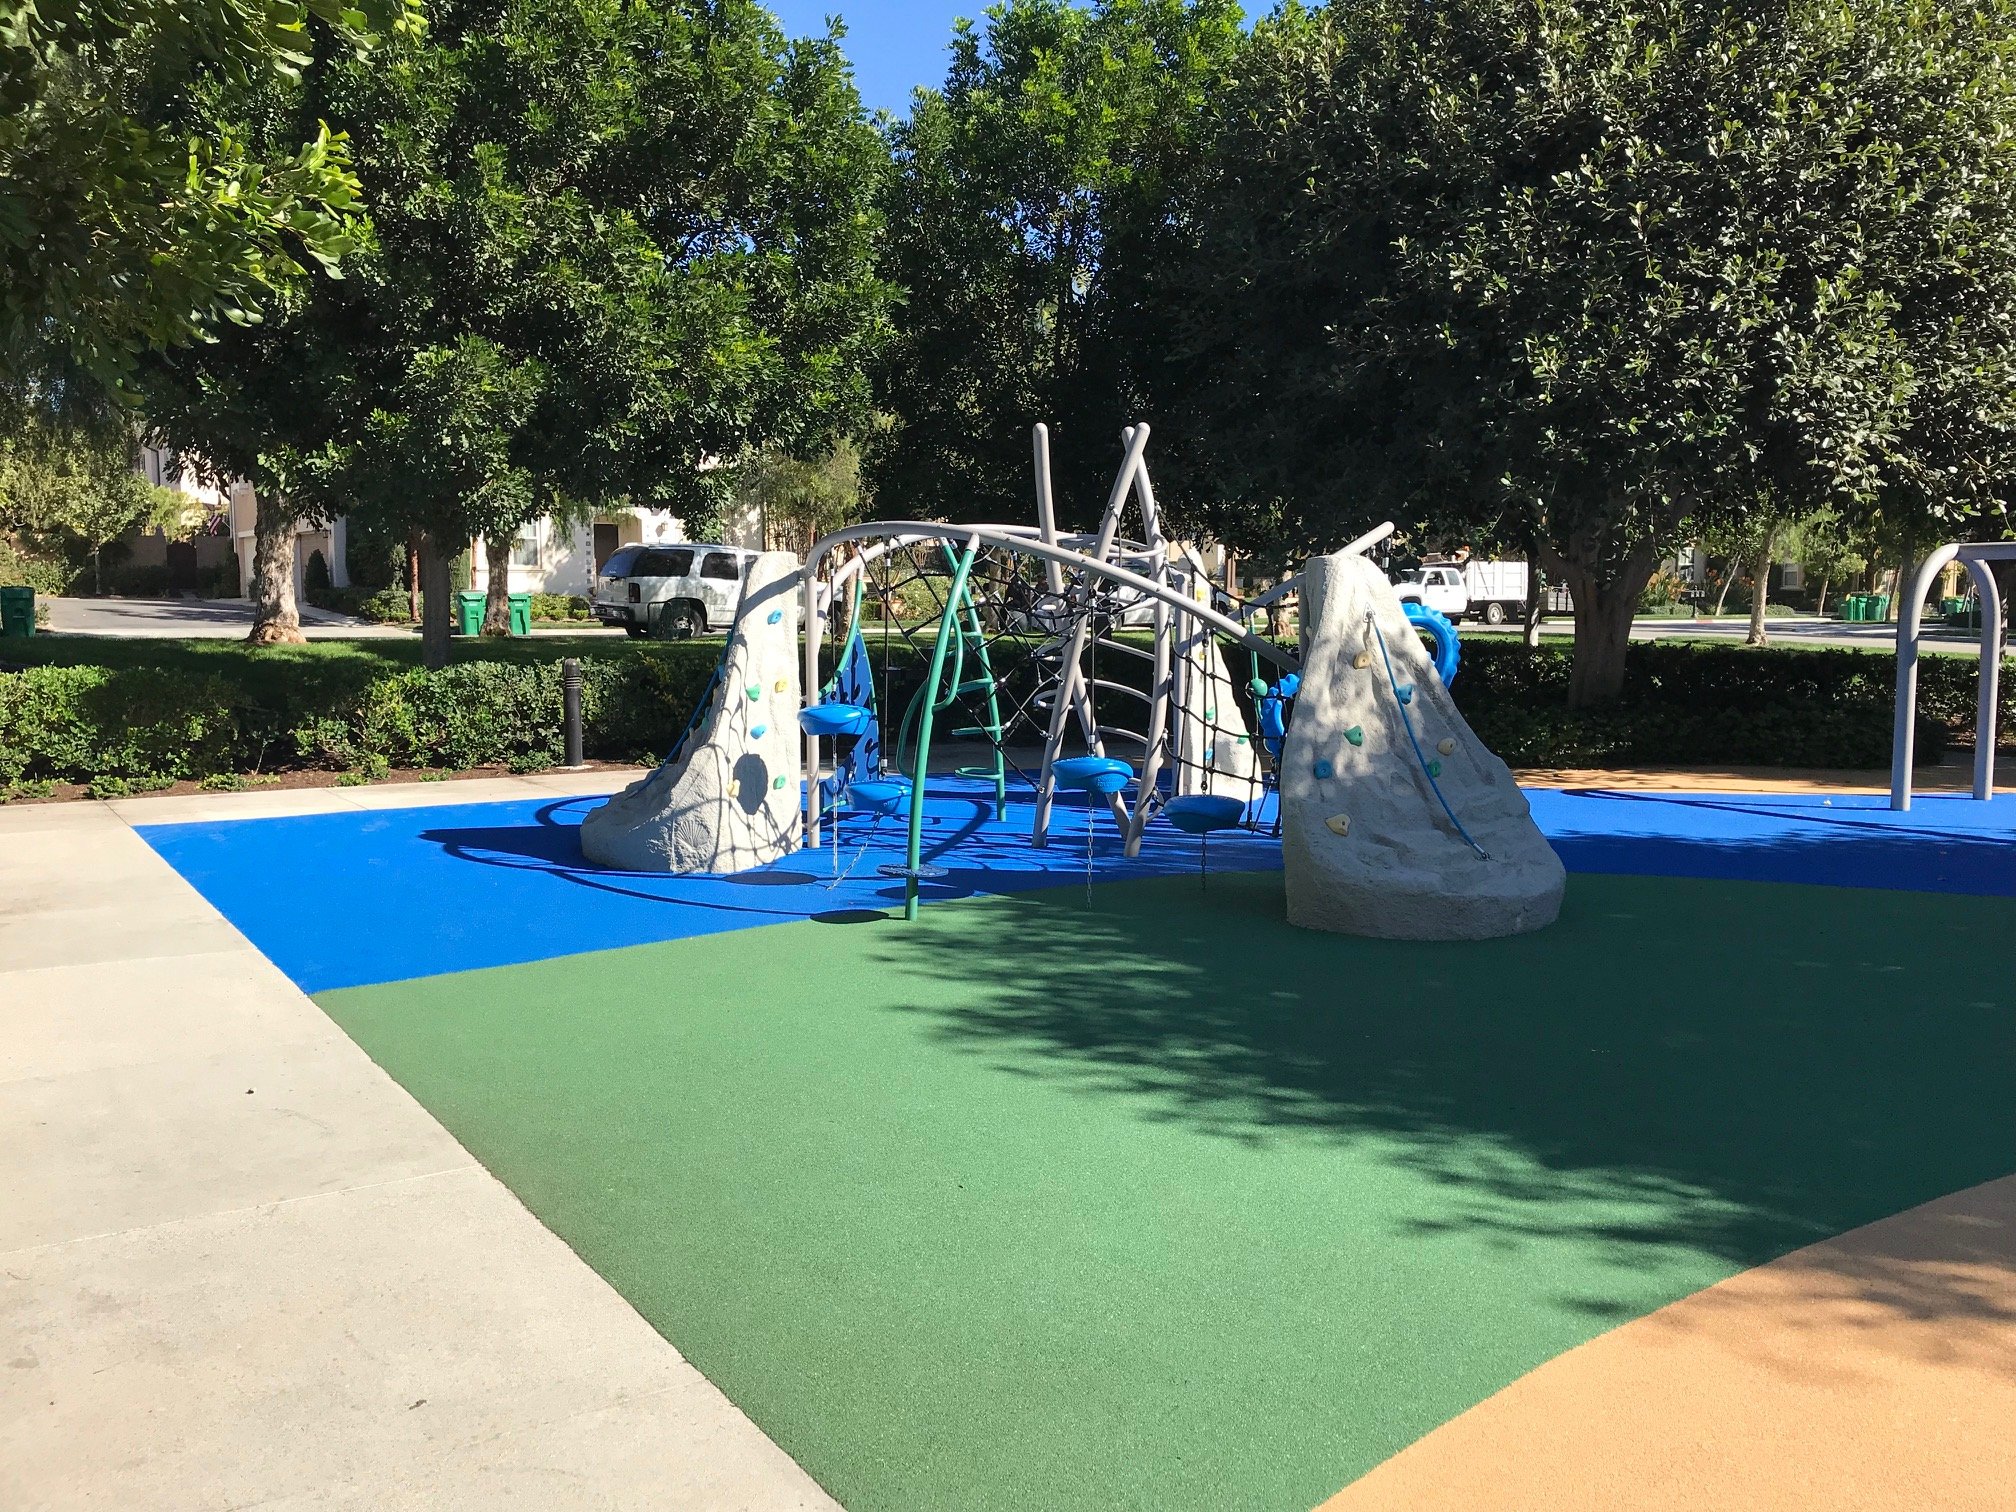 poured-in-place rubber at california neighborhood park